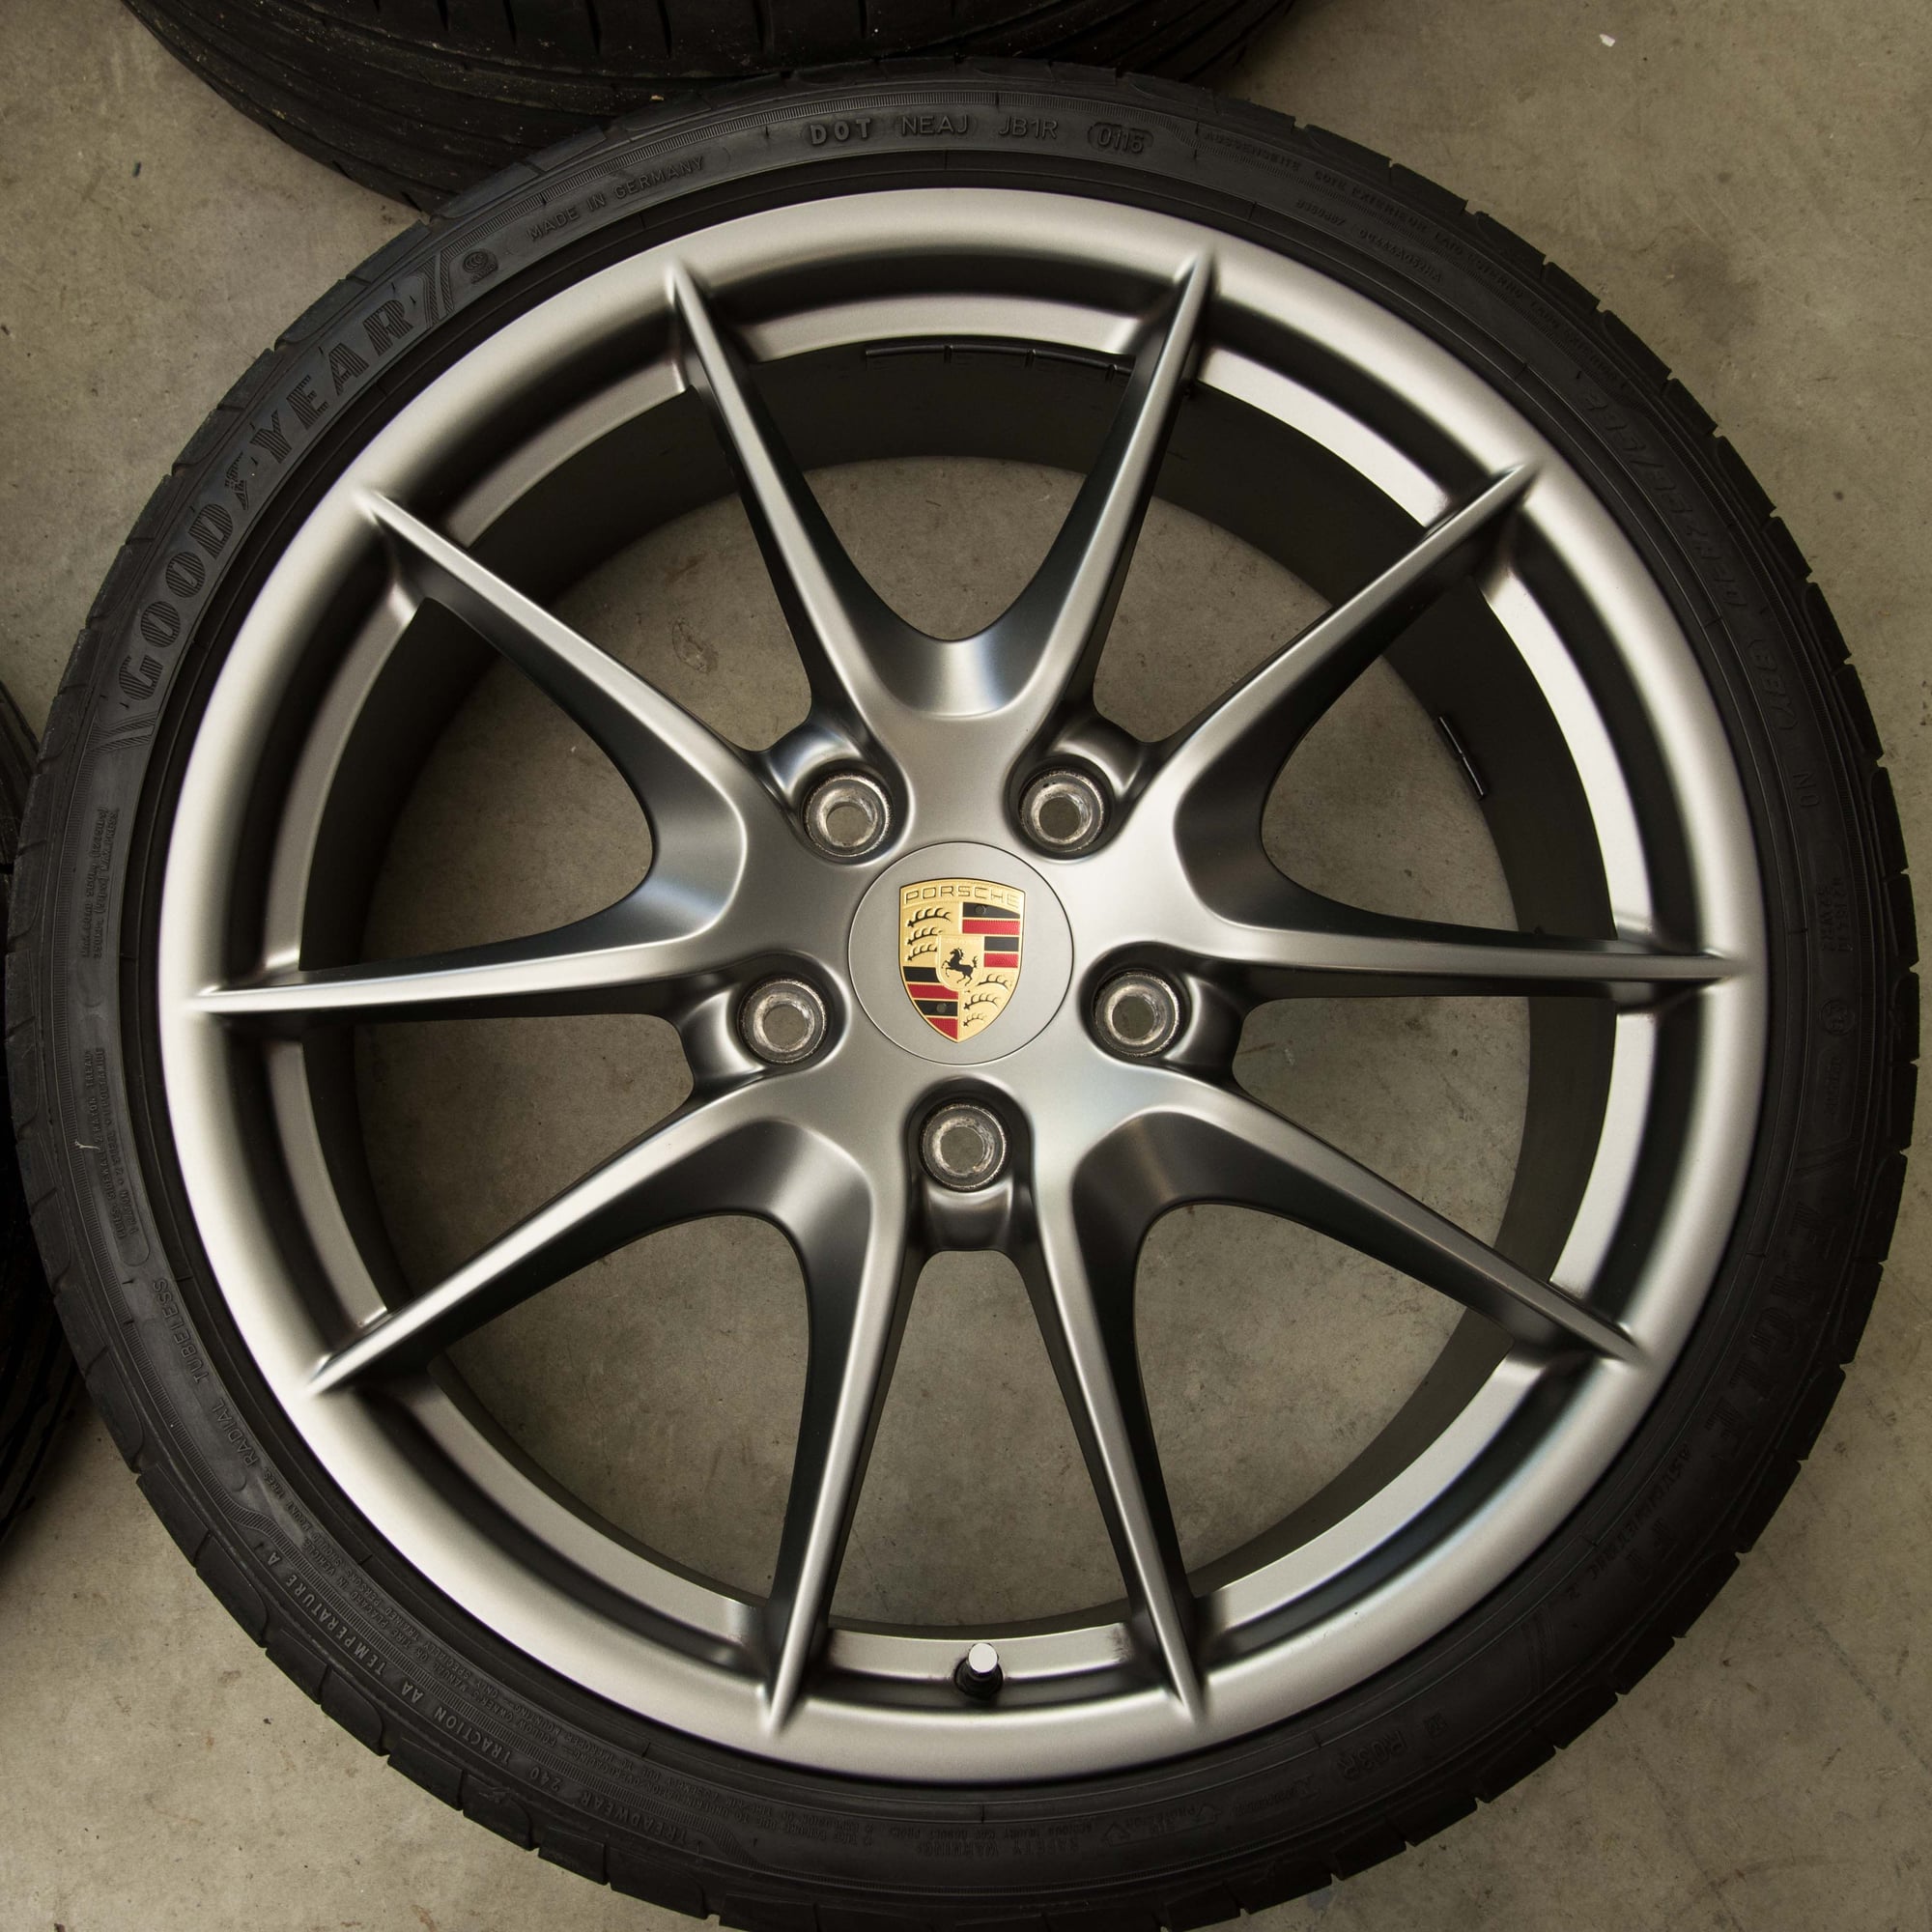 Wheels and Tires/Axles - Sold 20" OEM wheels & tires for 981 / 718 - Used - 2013 to 2018 Porsche Boxster - 2013 to 2018 Porsche Cayman - Bay Area, CA 94301, United States